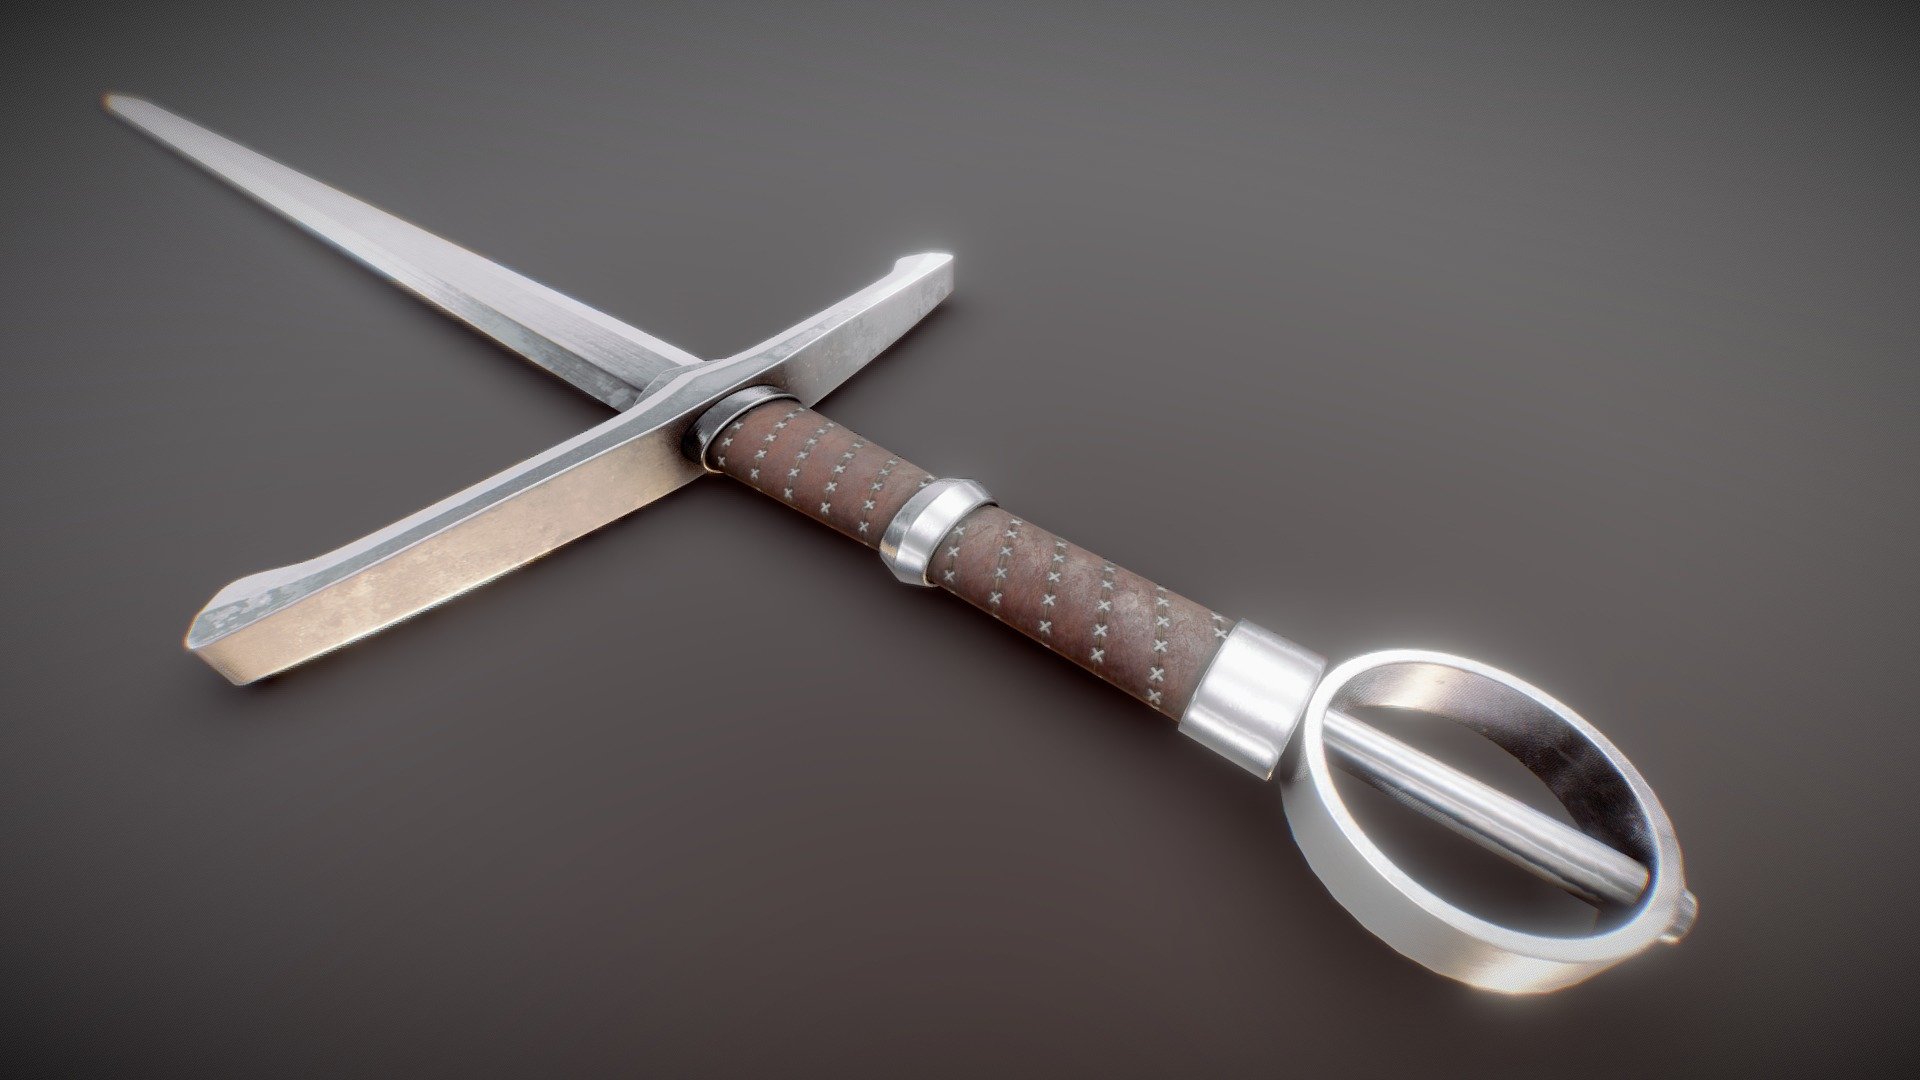 This is a medieval sword I made for a friend of mine. I hope you like the detail 3d model